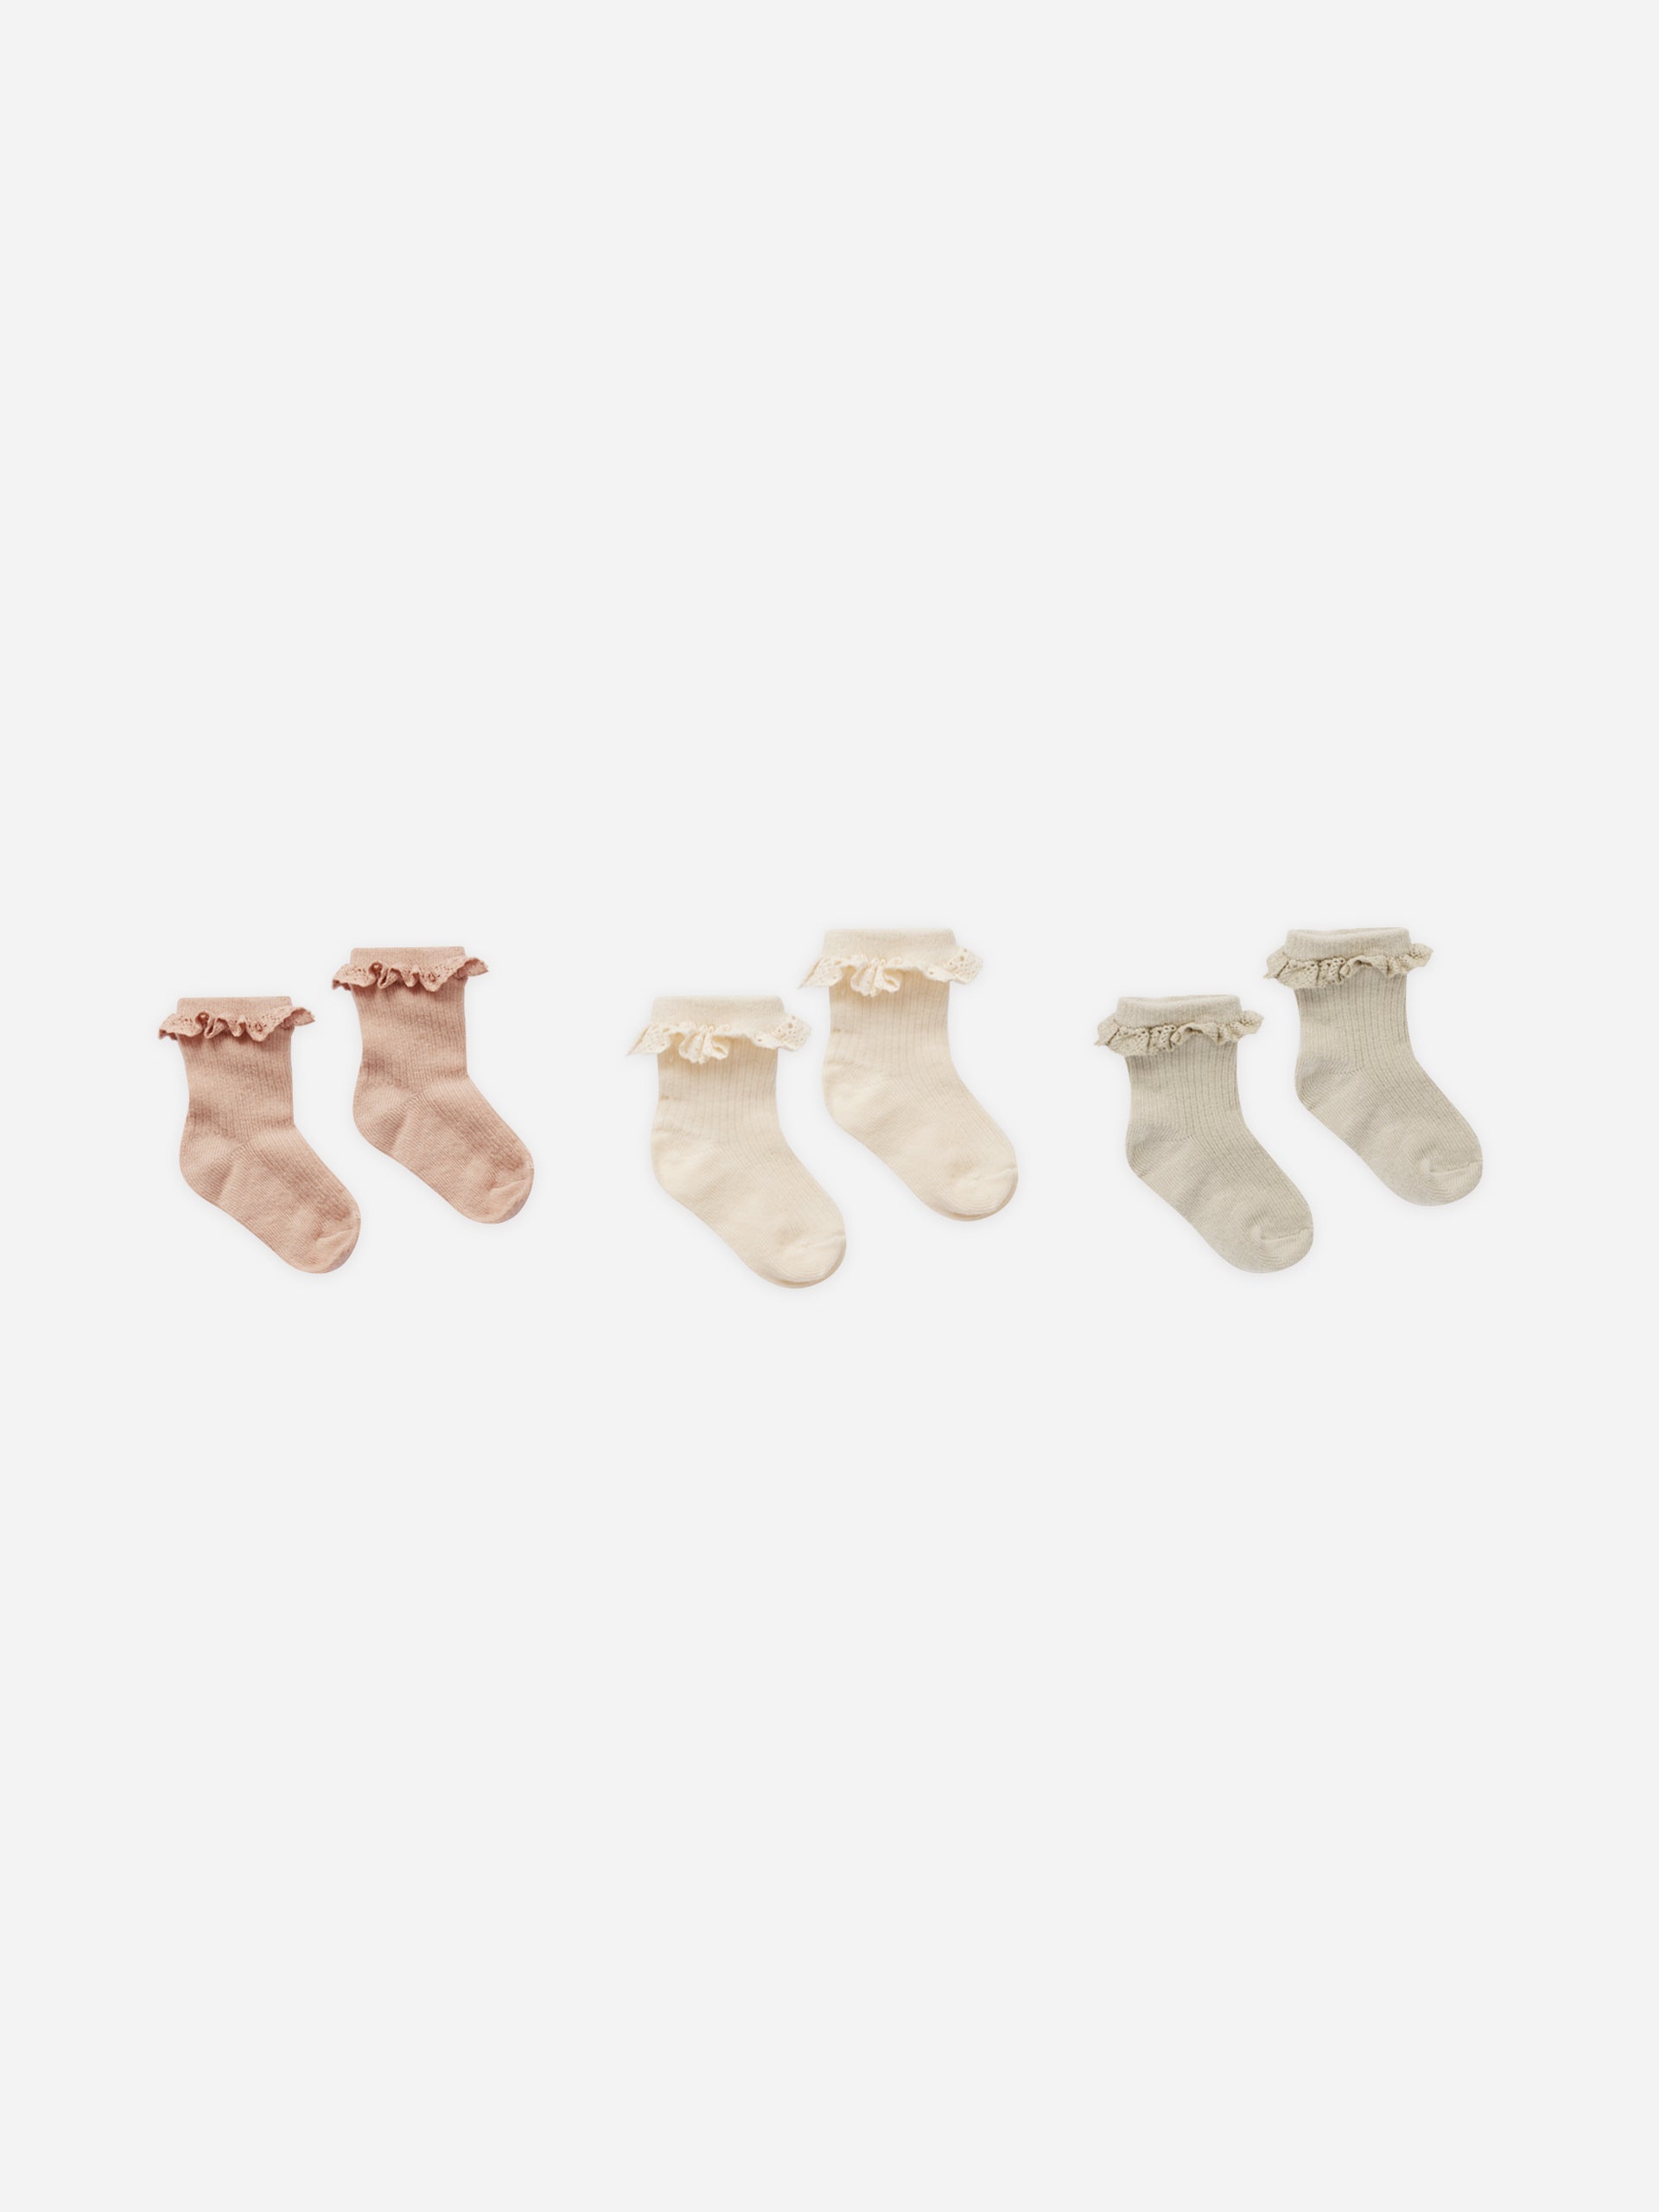 Lace Trim Socks, 3-Pack || Blush, Natural, Dove - Rylee + Cru | Kids Clothes | Trendy Baby Clothes | Modern Infant Outfits |